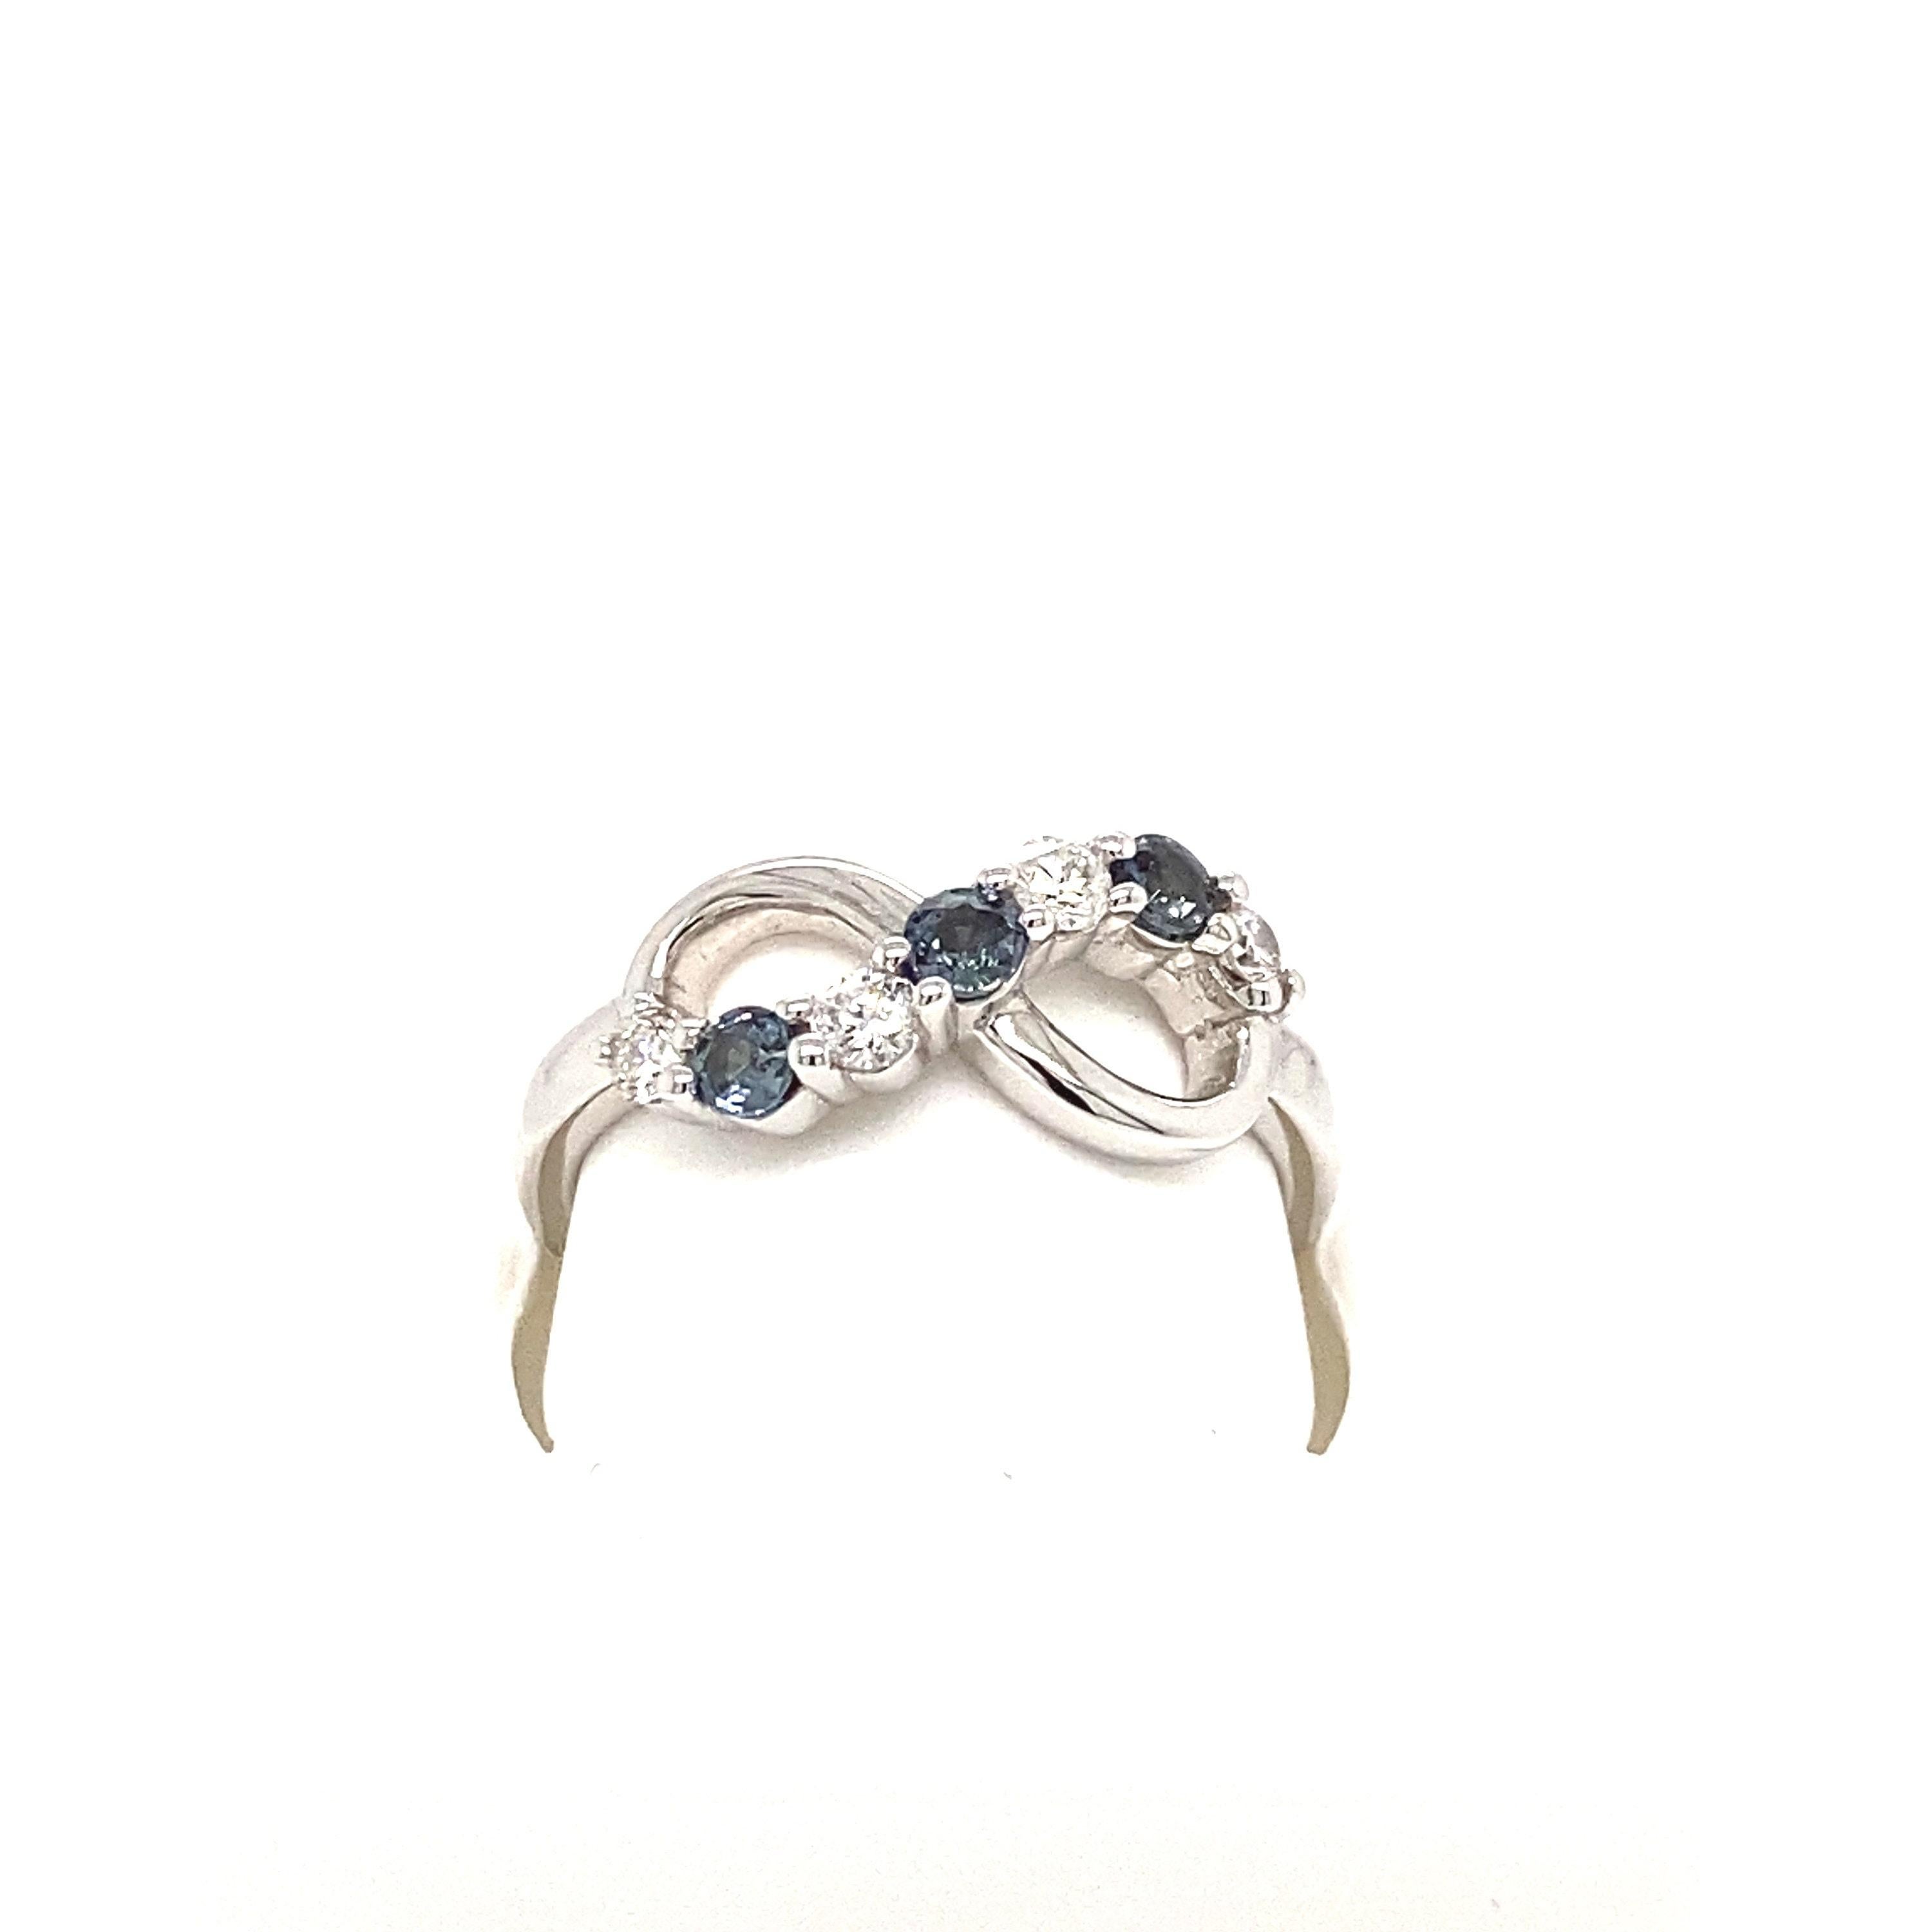 This is a gorgeous natural AAA quality round Alexandrite(s) surrounded by dainty diamonds that are set in a vintage white gold setting. This ring features  natural 0.25 carat round alexandrites that are certified by the Gemological Institute of